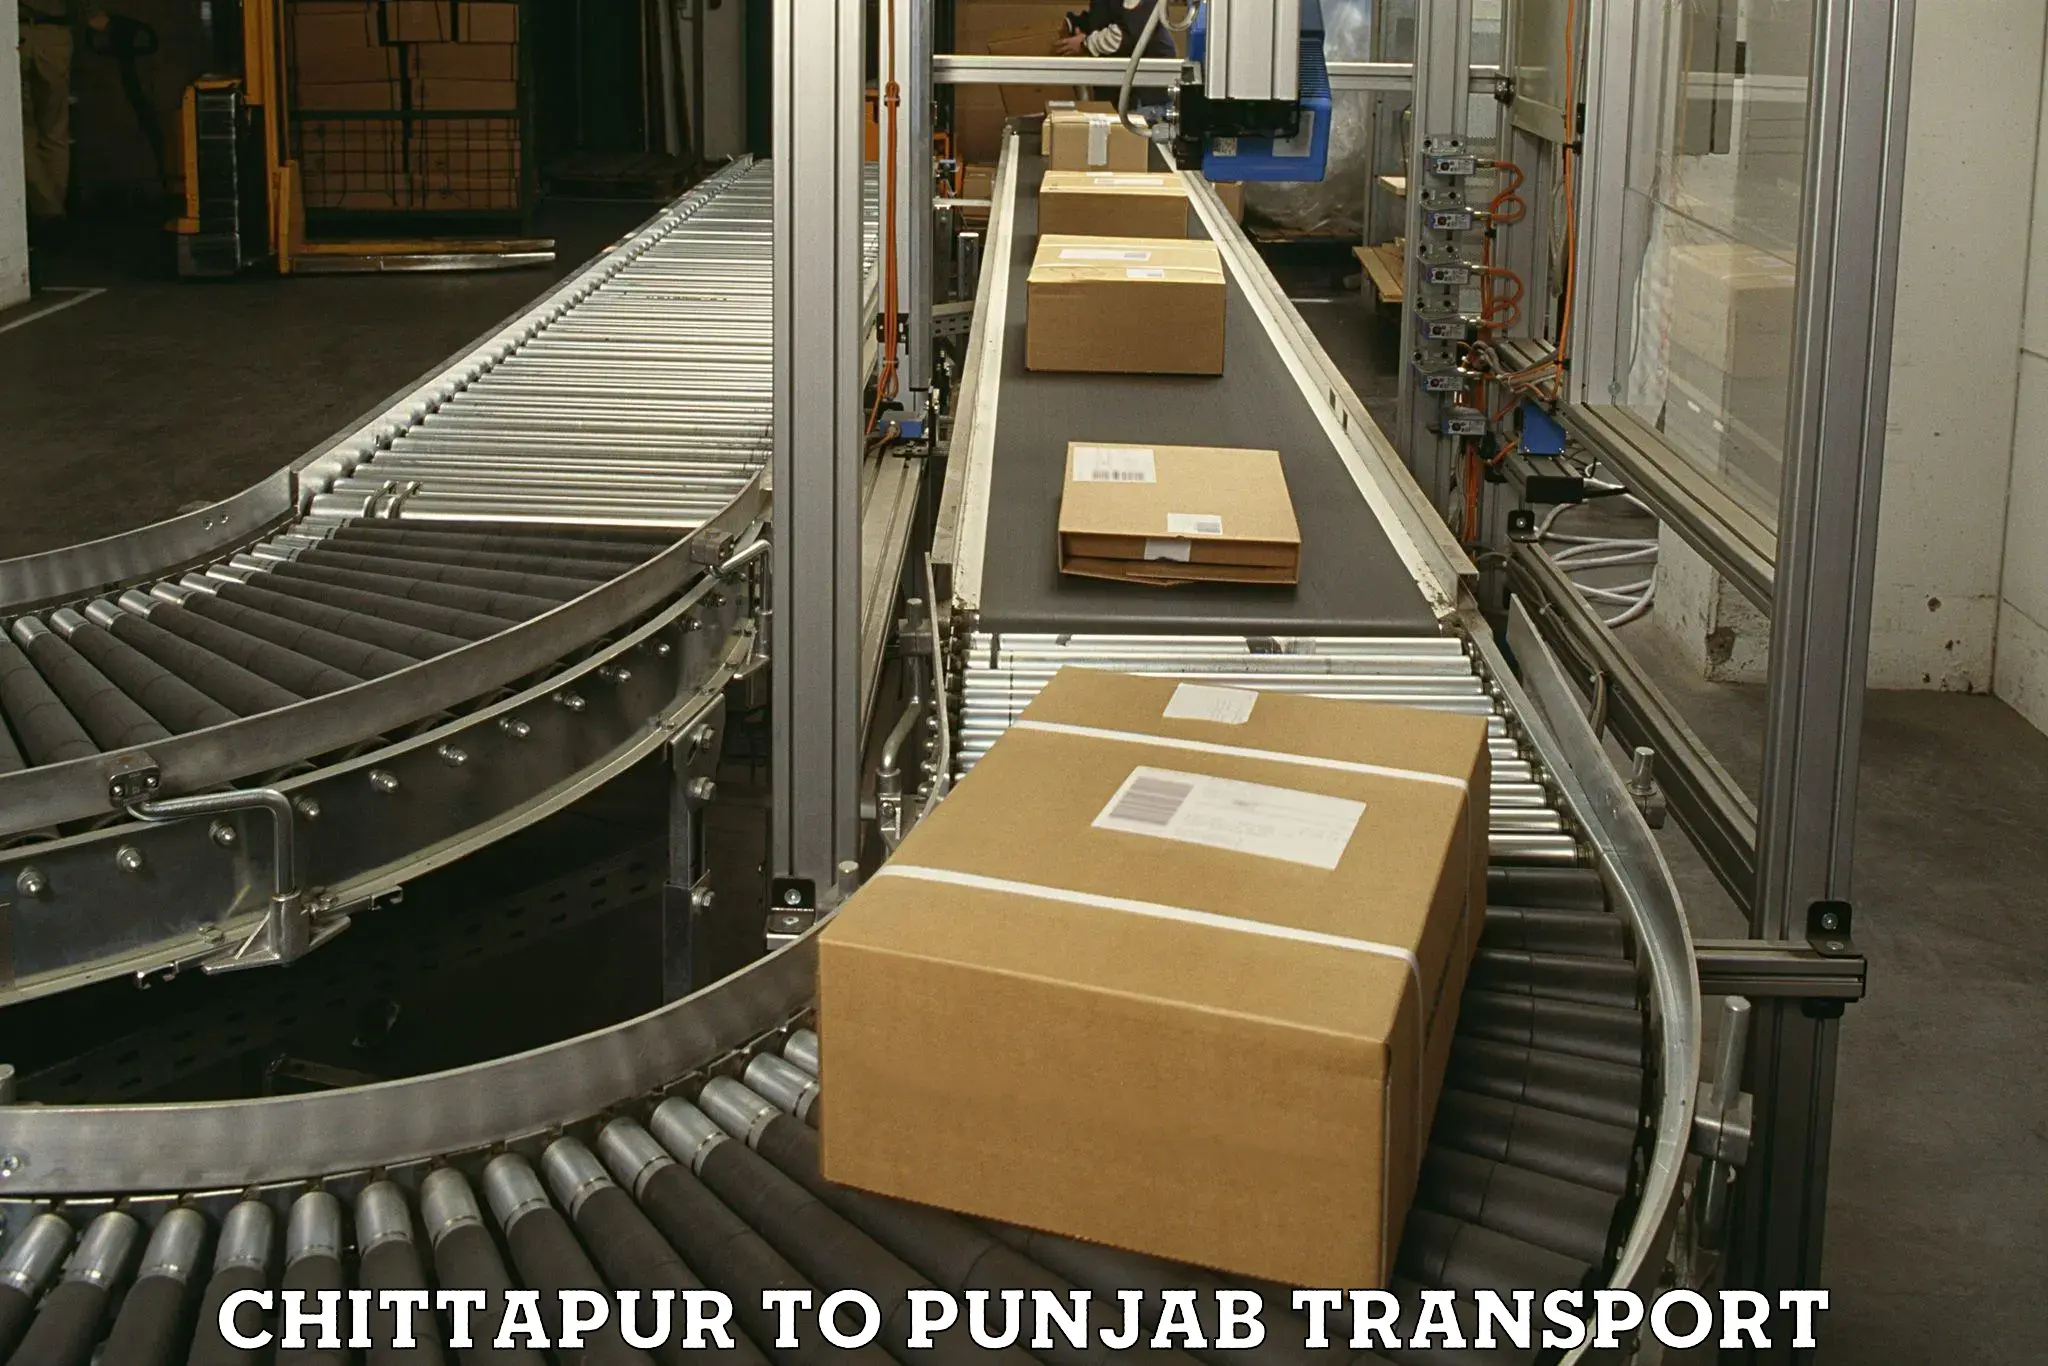 Truck transport companies in India in Chittapur to Talwandi Sabo